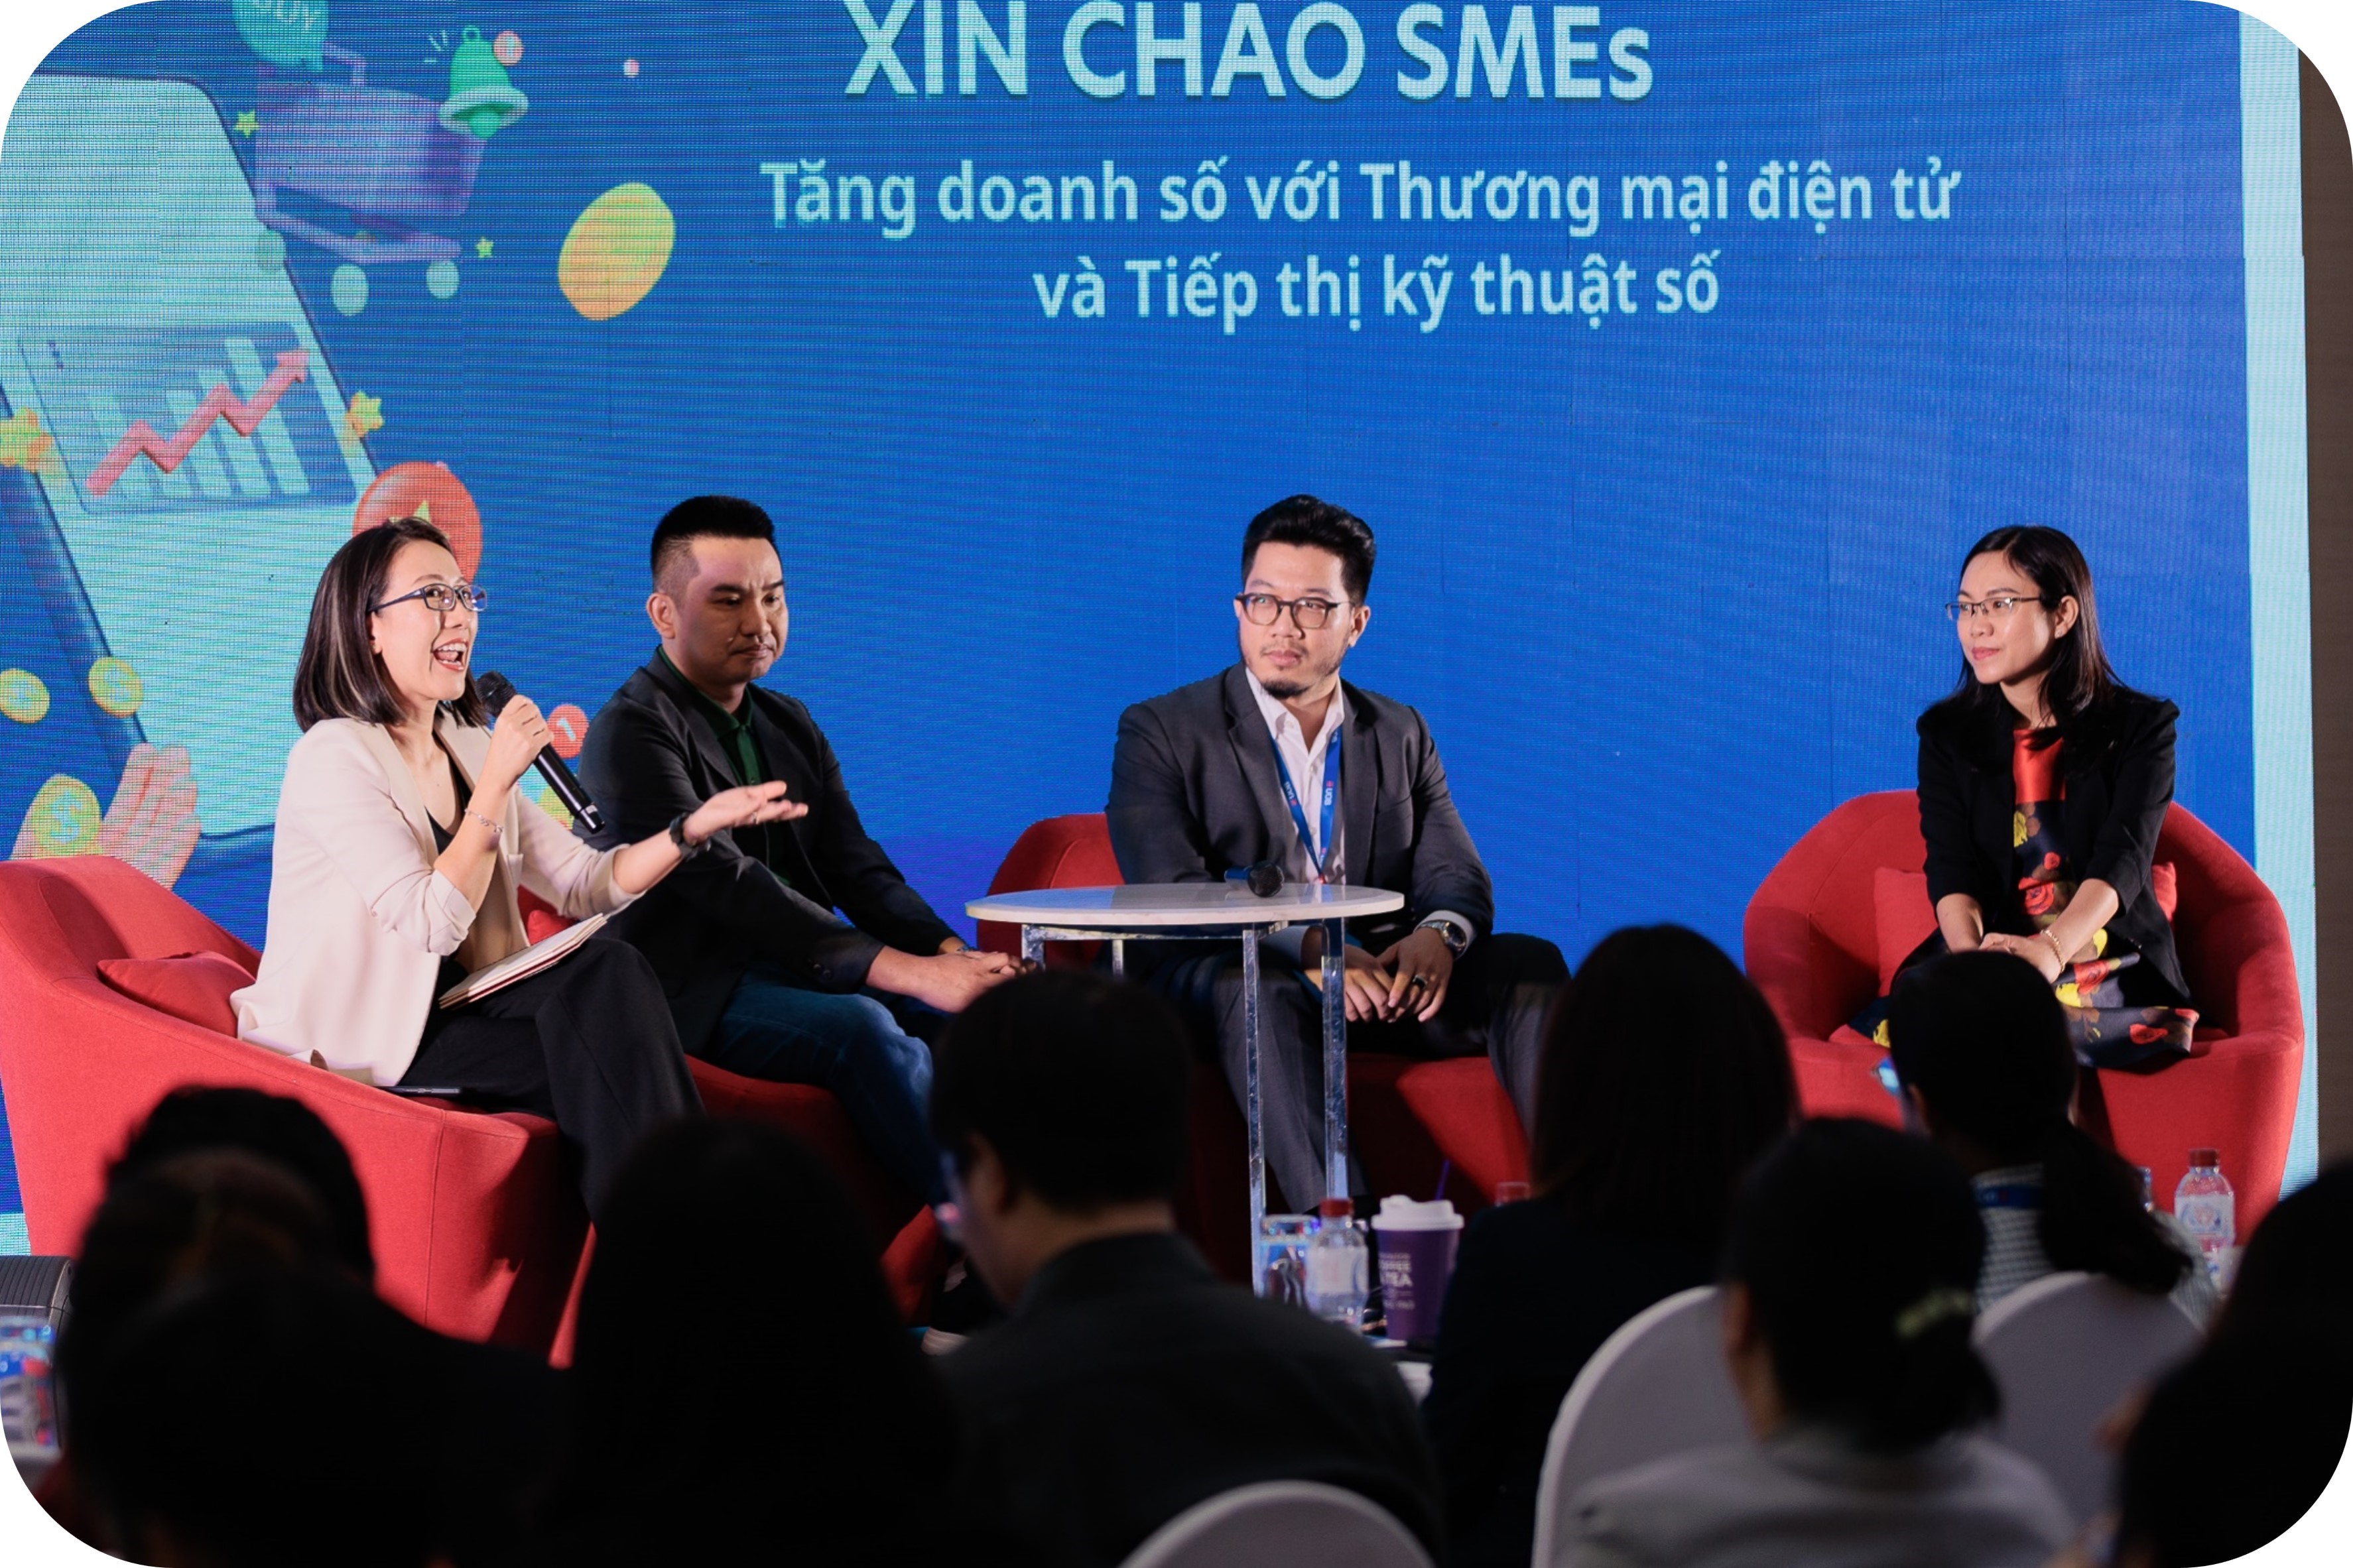 Bsso Panel - Xin Chào Smes: Grow Your Sales Through E-Commerce And Digital Marketing 2023 Recap